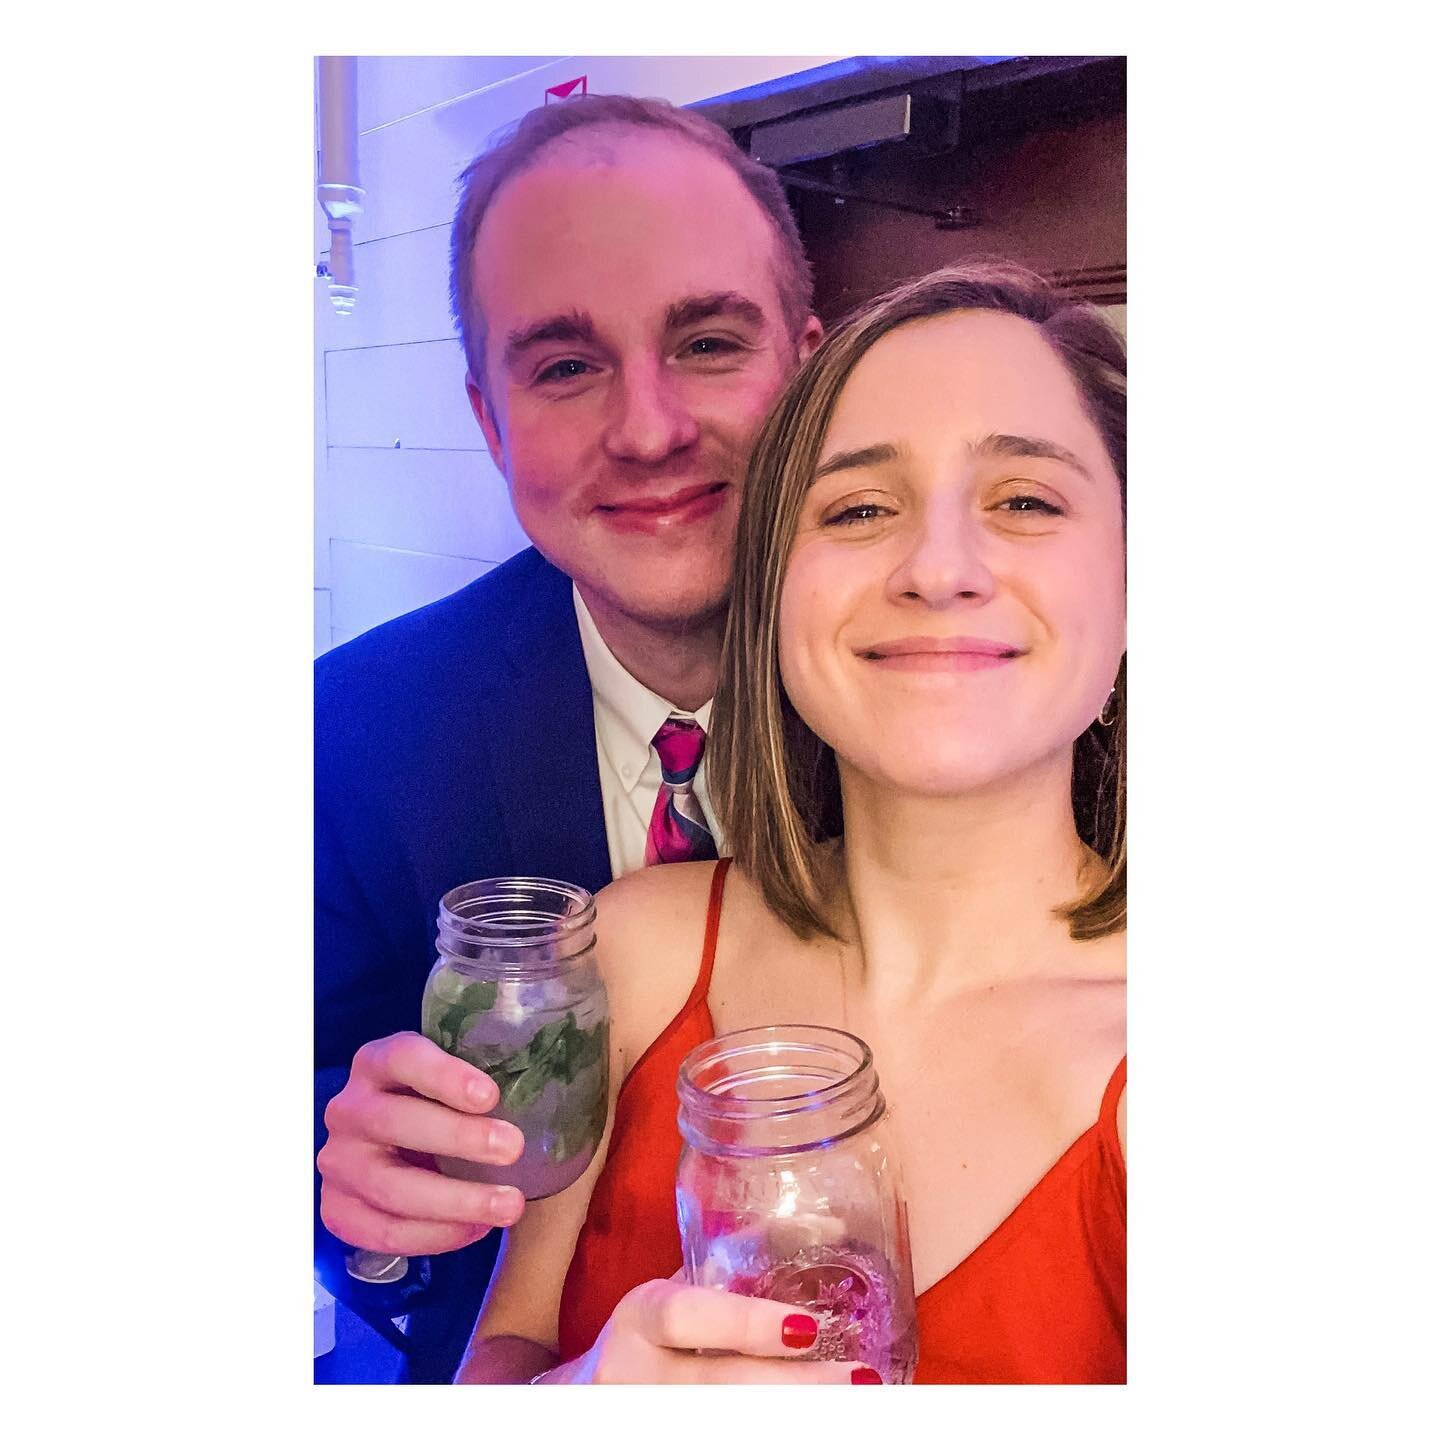 #thelangs2020, but make it 2021🍾💗

Very much still recovering from The Langs big bash Saturday, but here&rsquo;s a selfie because my camera lenses had tequila soda on it and all the rest are blurry